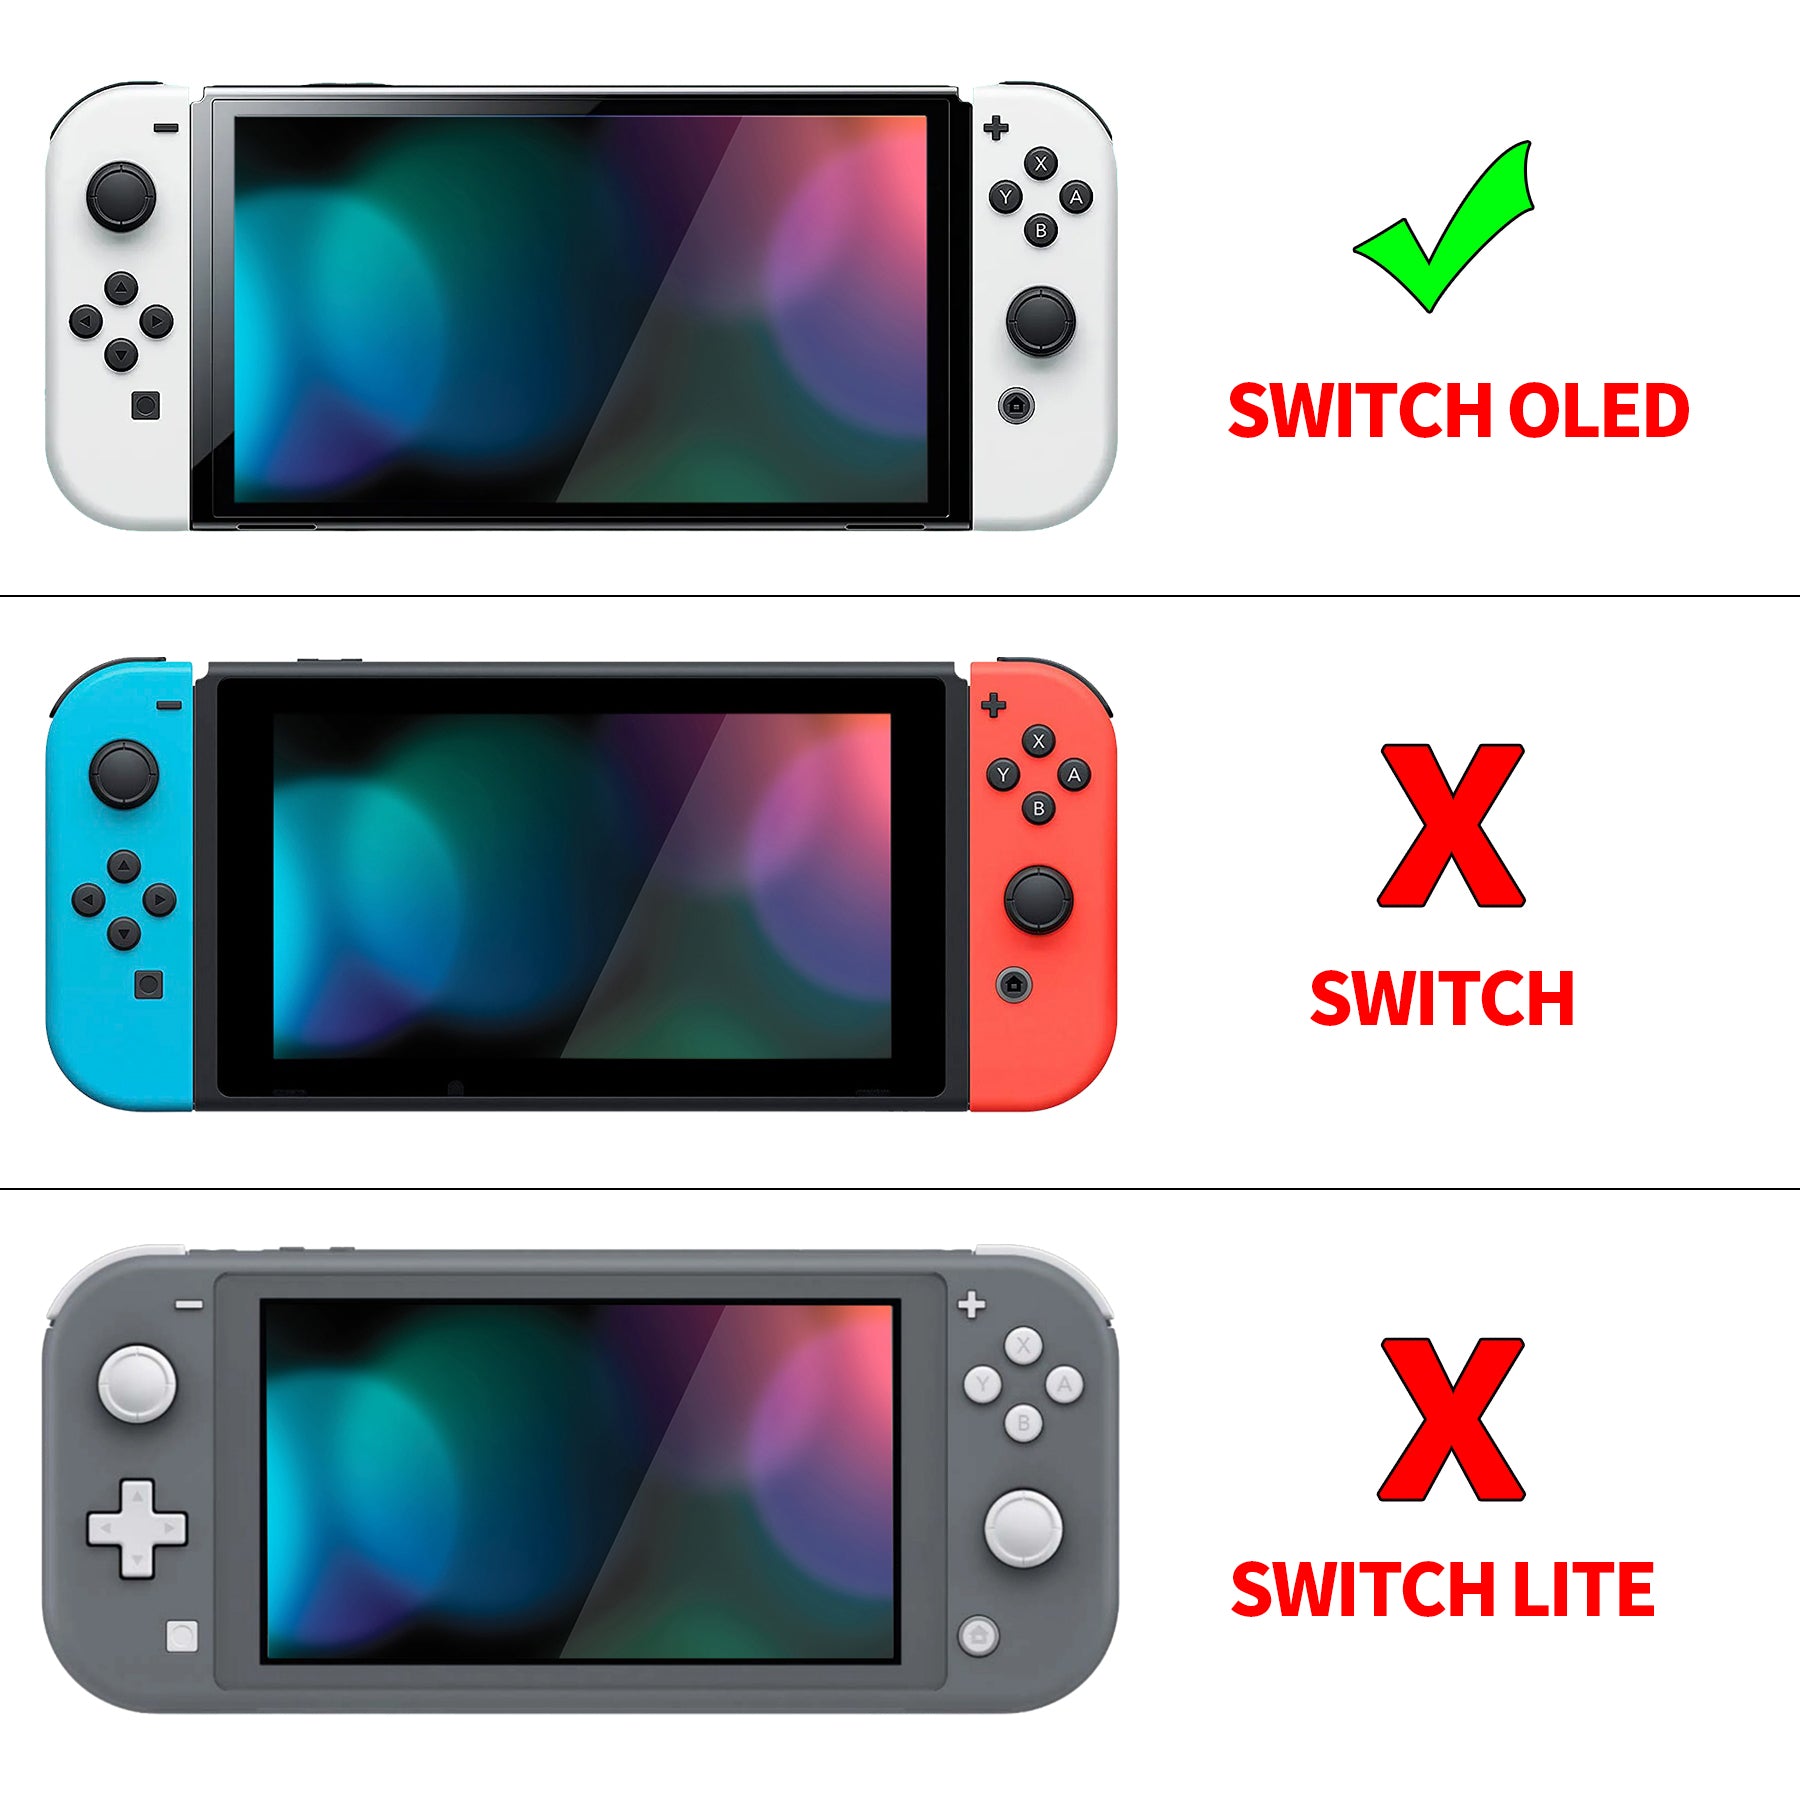 PlayVital ZealProtect Soft Protective Case for Switch OLED, Flexible Protector Joycon Grip Cover for Switch OLED with Thumb Grip Caps & ABXY Direction Button Caps - Lemonade Kitty - XSOYV6037 playvital